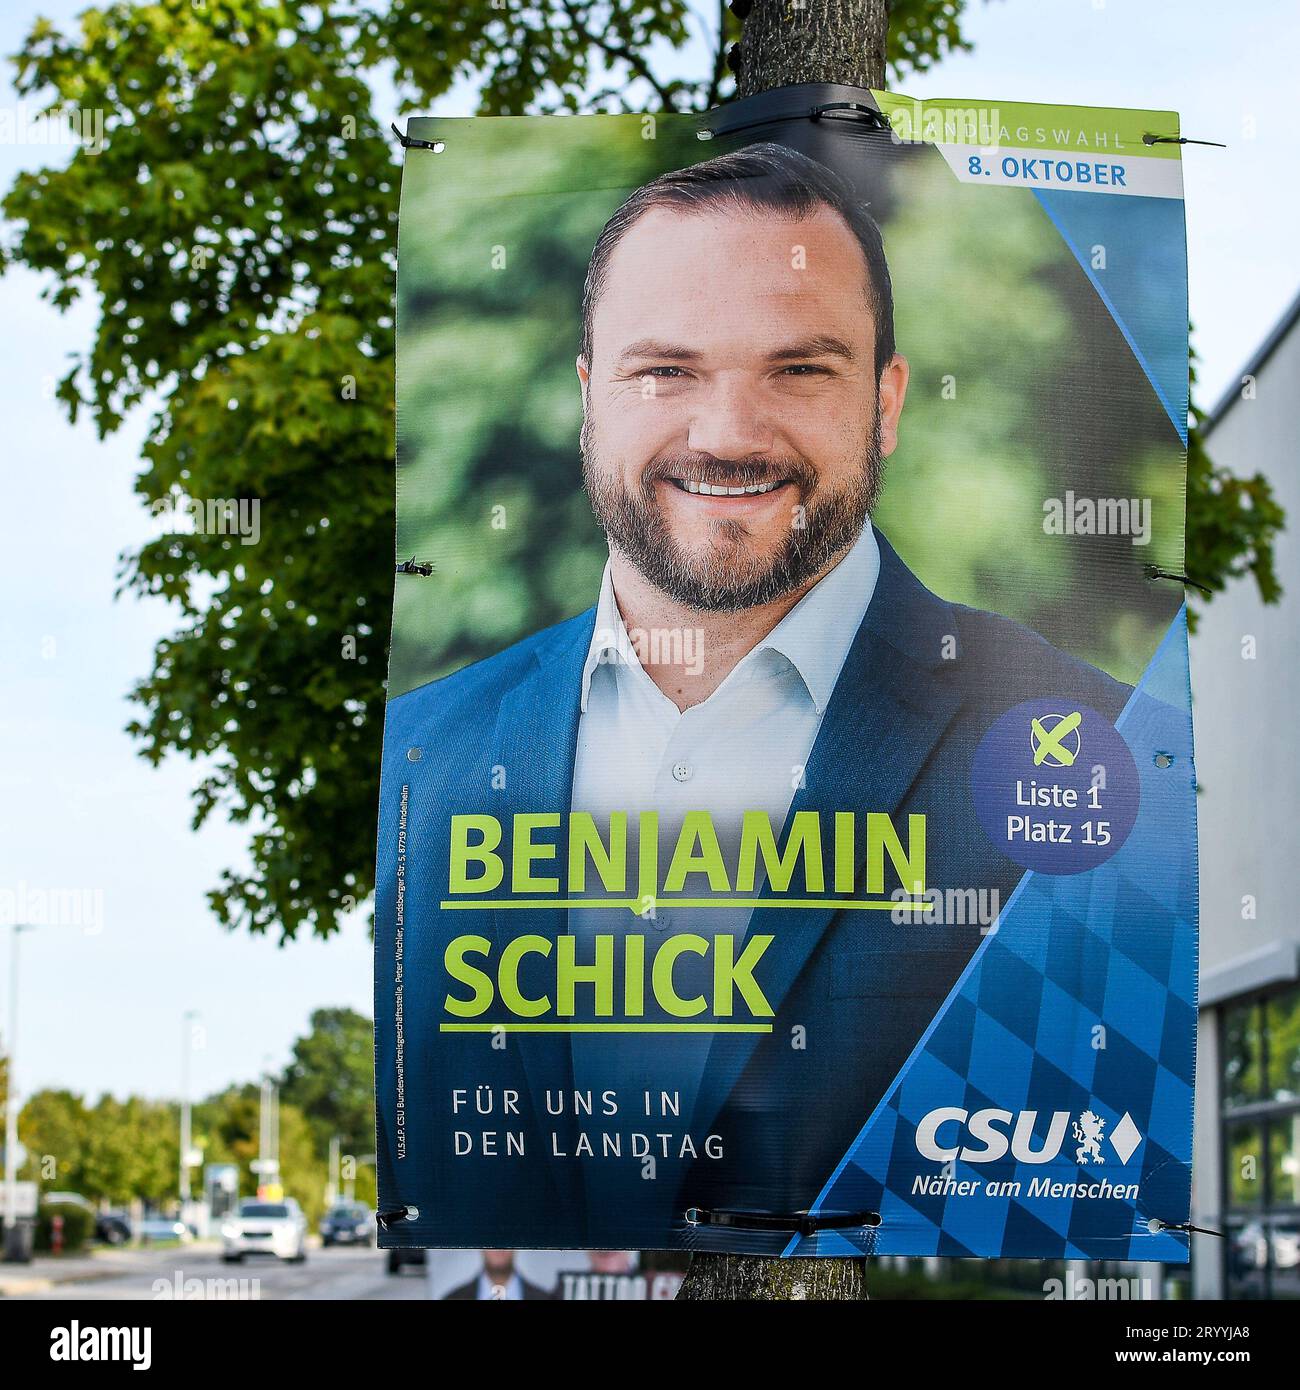 GER, Landtagswahl in Bayern 2023, Wahlplakate in Kaufbeuren/30.09.2023, Innovapark, Kaufbeuren, GER, Landtagswahl in Bayern 2023, Wahlplakate in Kaufbeuren, eine Woche vor der Landtagswahl sind zahlreiche Wahlplakate an den Ausfallstrassen zu sehen im Bild ein Wahlplakat der CSU mit Listenkandidat Benjamin Schick *** GER, state election in Bavaria 2023, election posters in Kaufbeuren 30 09 2023, Innovapark, Kaufbeuren, GER, state election in Bavaria 2023, election posters in Kaufbeuren, one week before the state election numerous election posters are to be seen at the arterial roads in the p Stock Photo